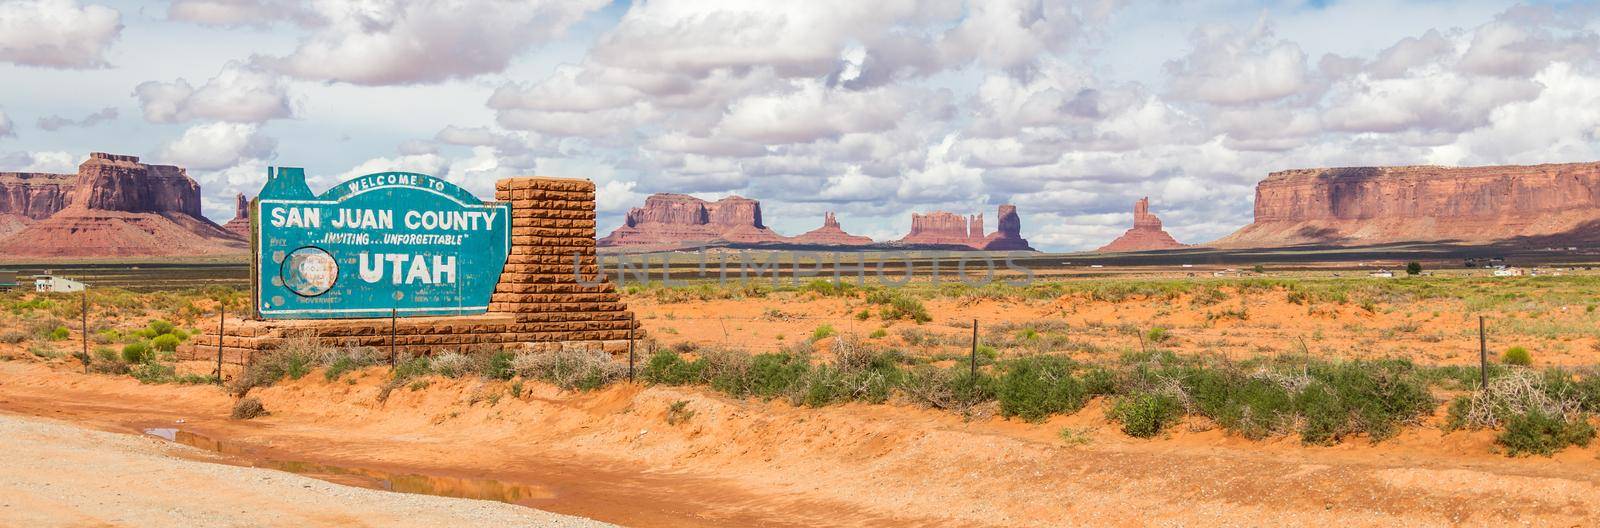 Welcome sign in desert for San Juan County in Monument Valley in Utah. by Mariakray